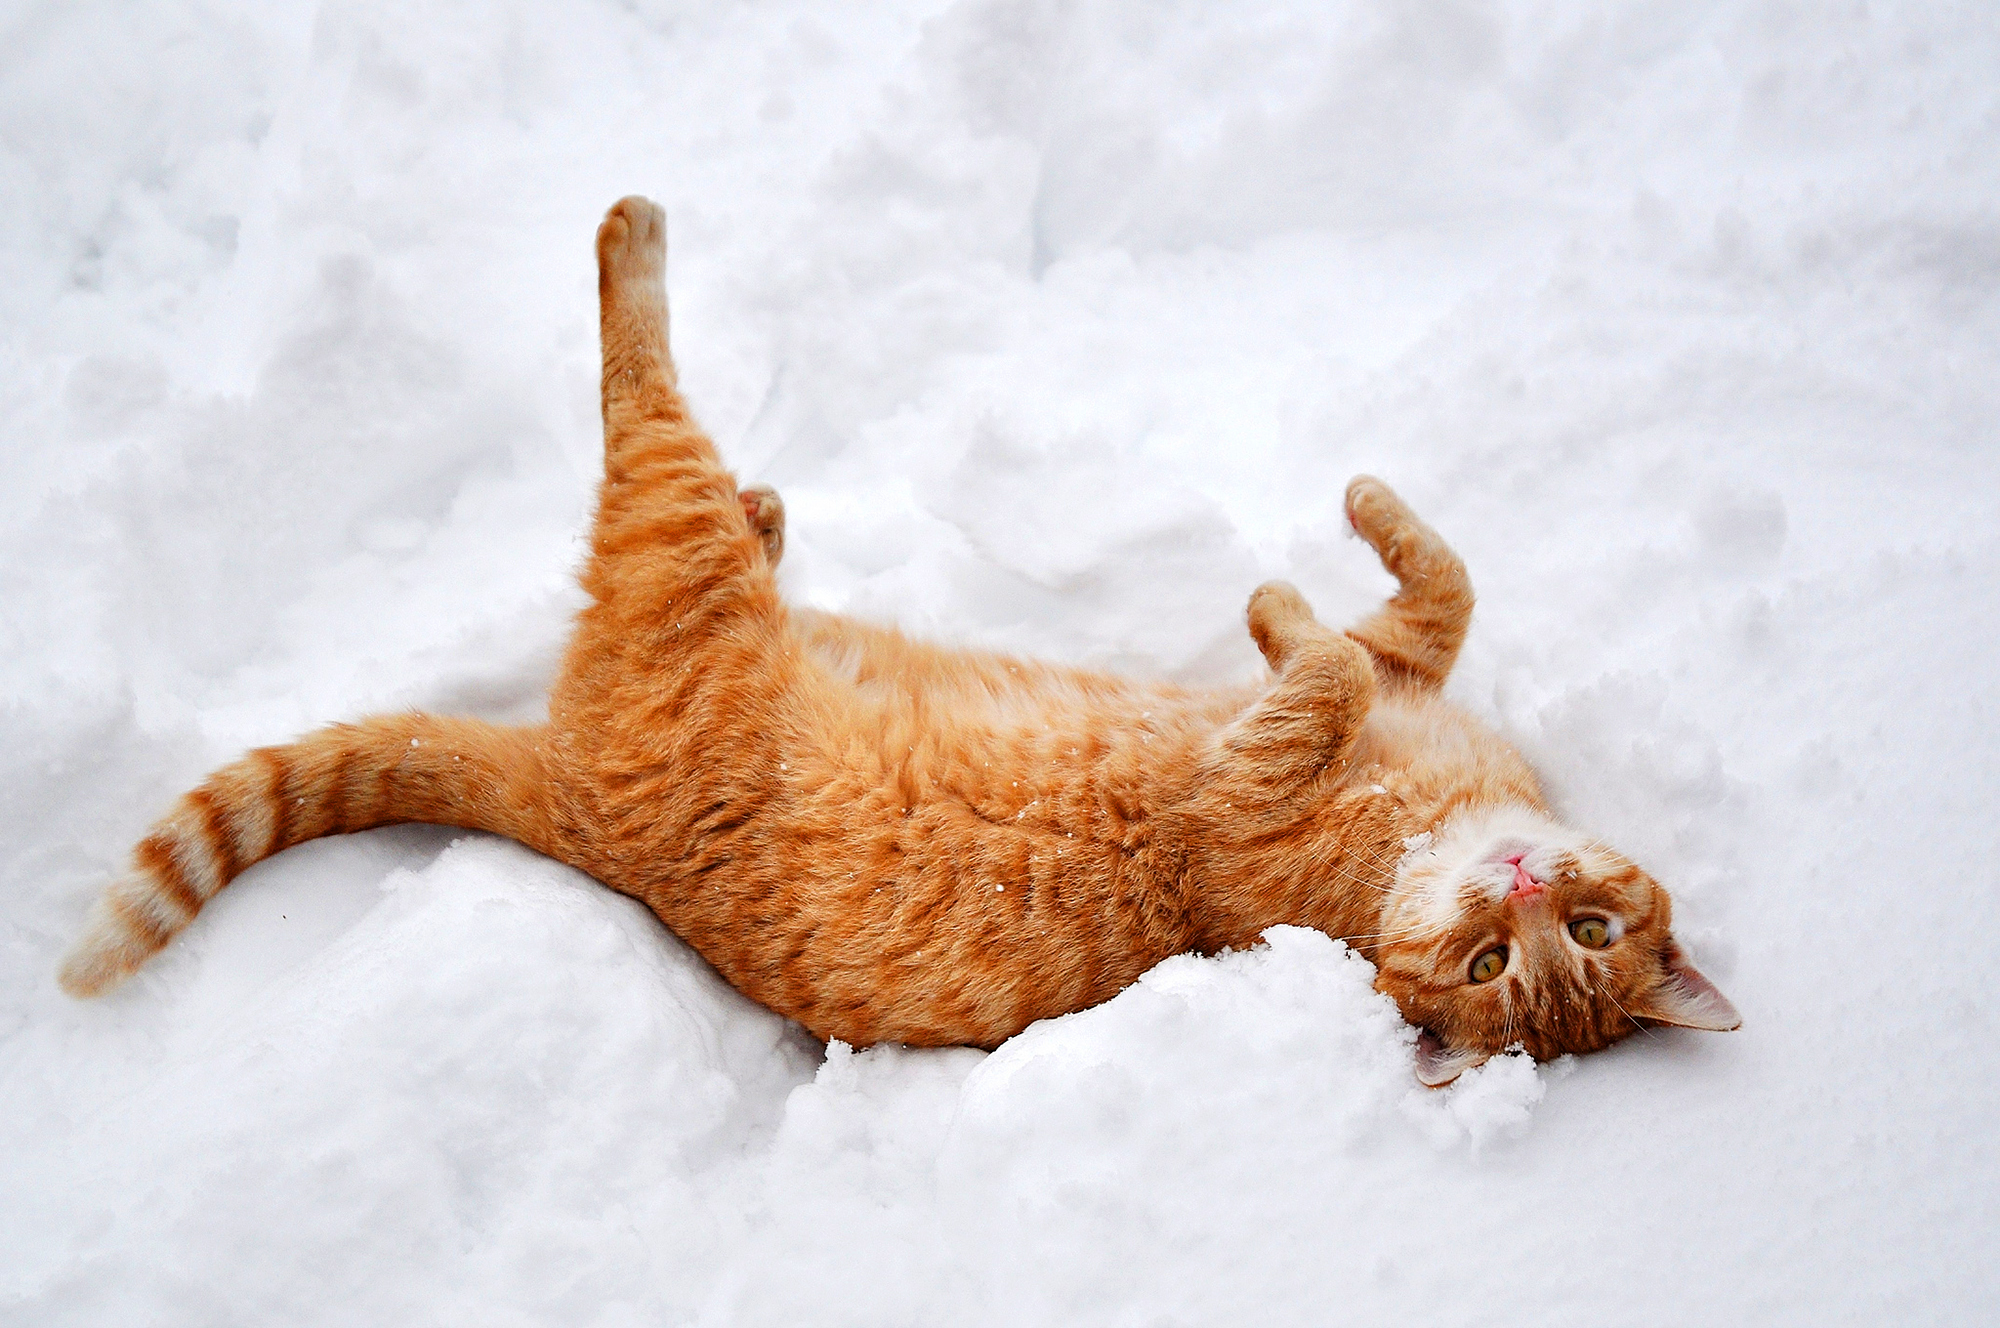 60520 download wallpaper cat, animals, winter, nature, snow, red, lies, redhead, paws screensavers and pictures for free